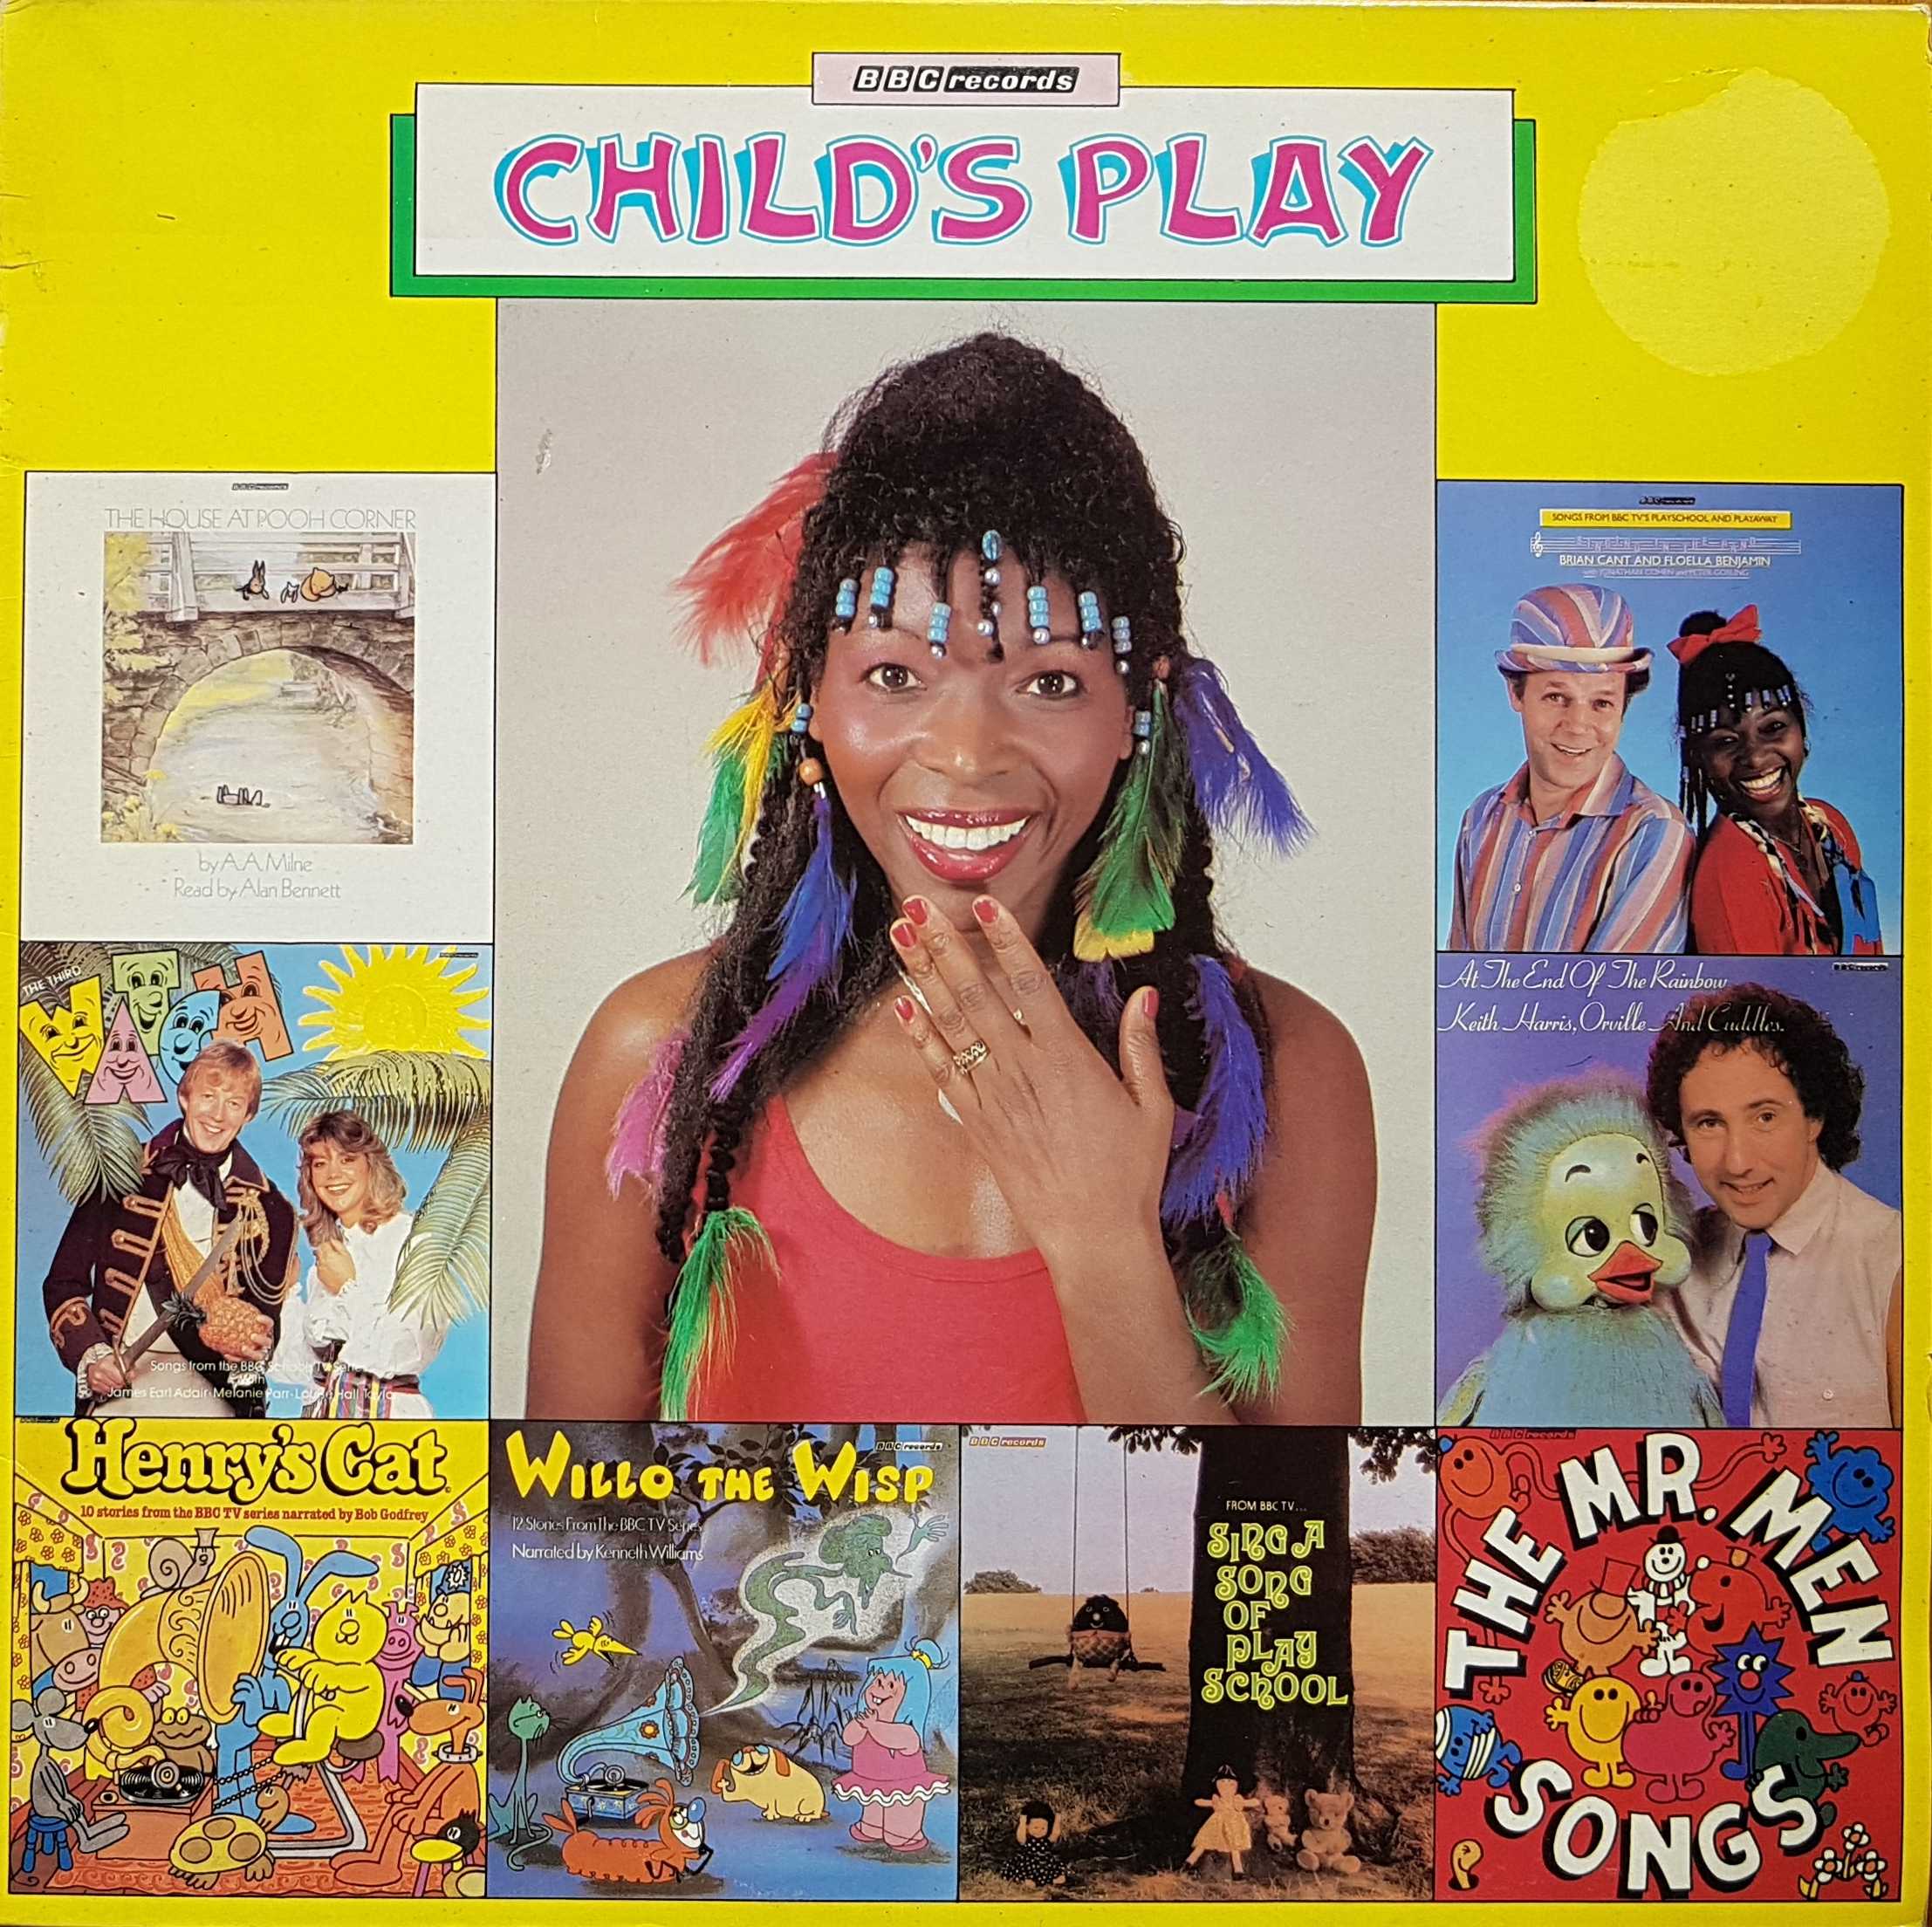 Picture of REA 498 Child's play by artist Various from the BBC albums - Records and Tapes library